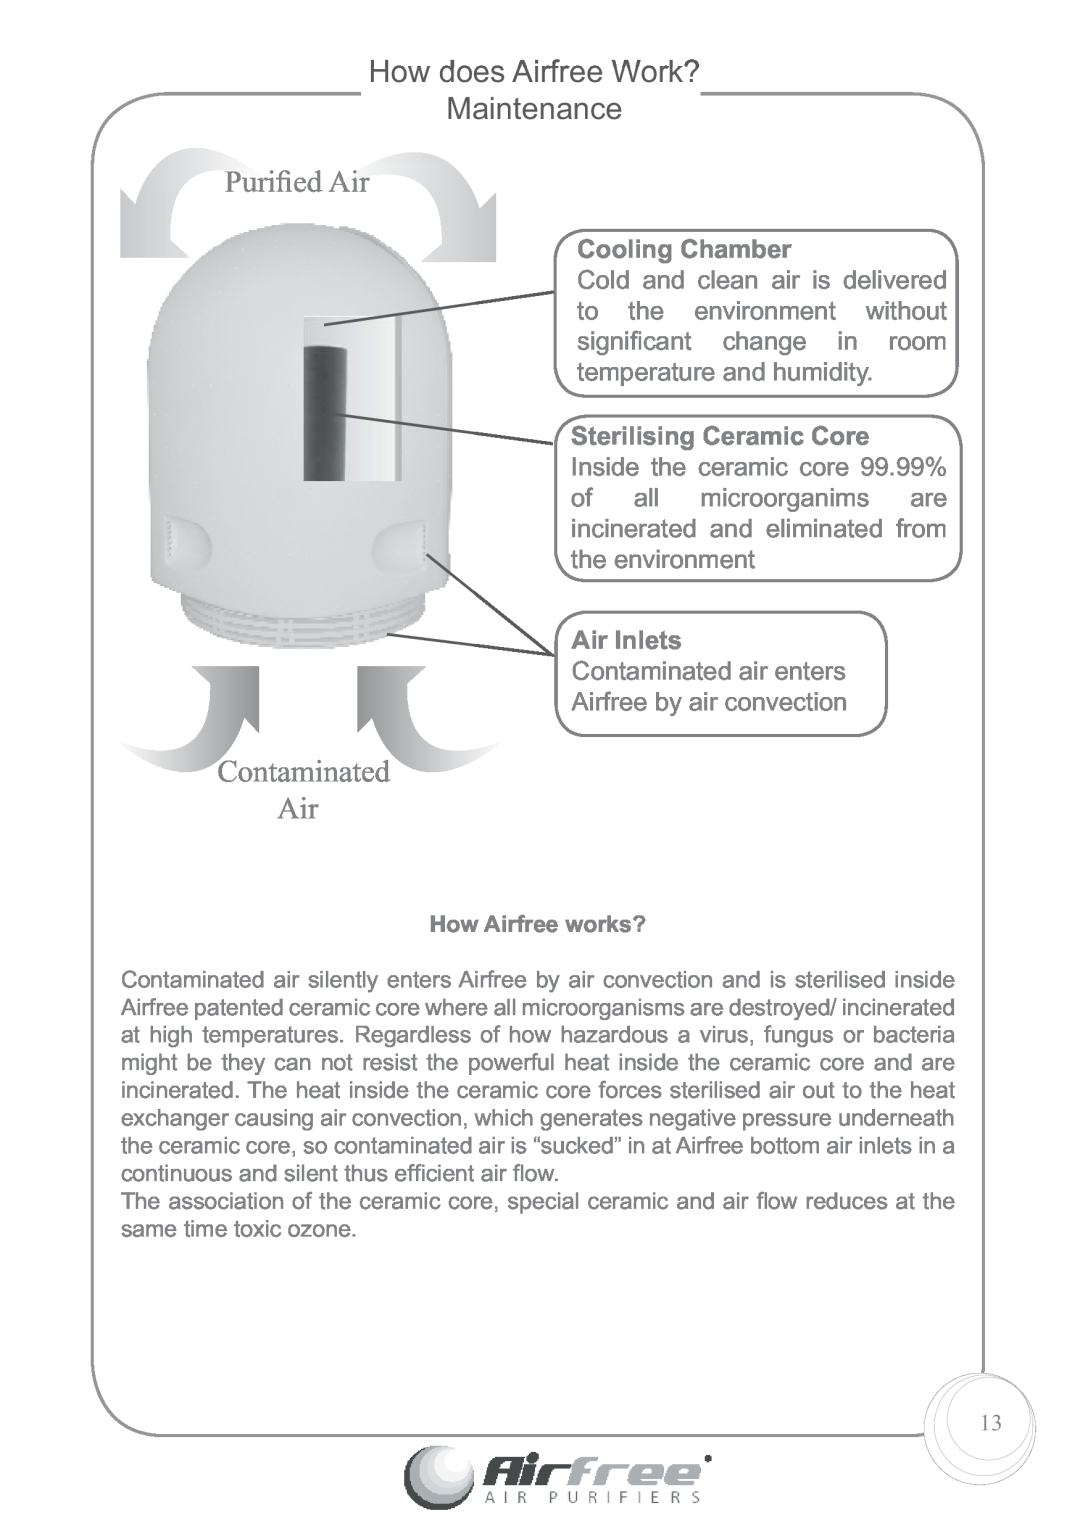 Airfree Platinum 125 How does Airfree Work? Maintenance, Puriﬁed Air, Contaminated Air, Cooling Chamber, Air Inlets 